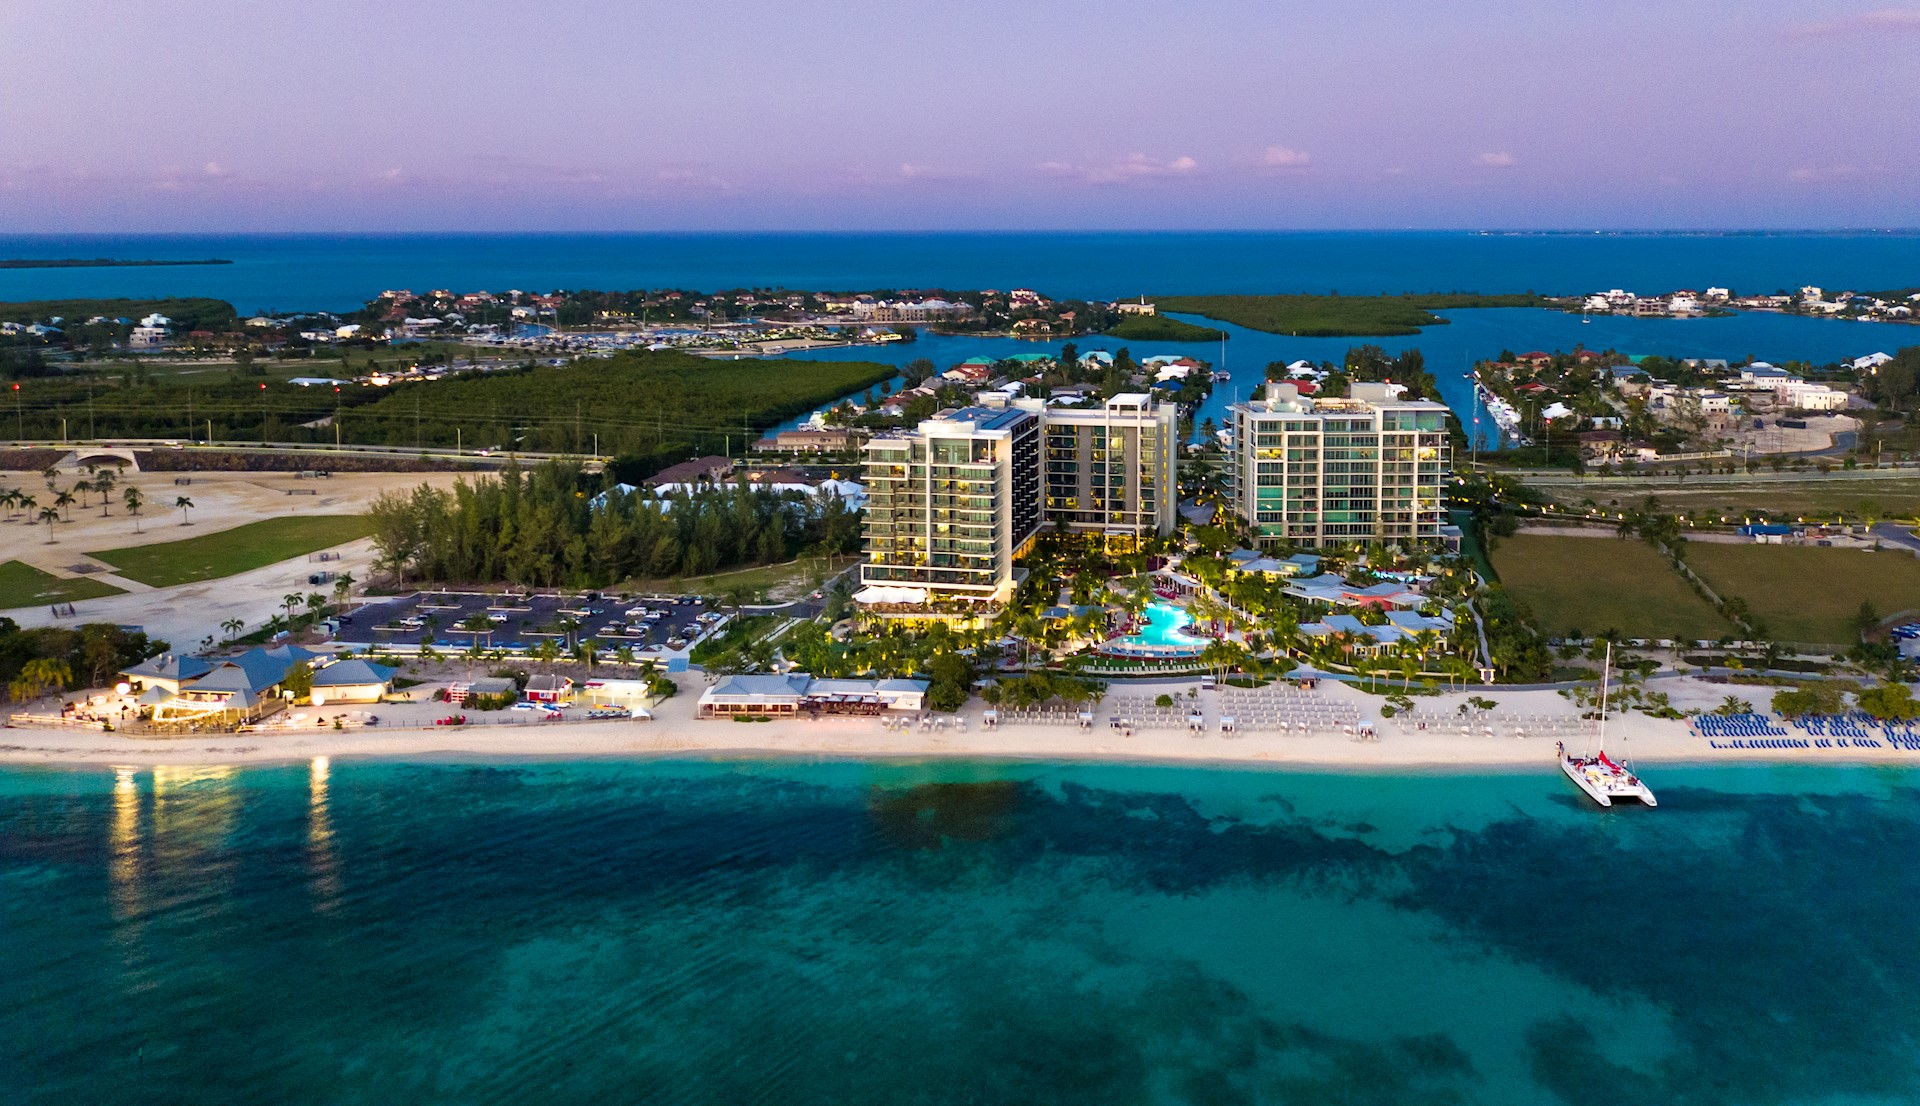 Seafire Resort and Residences Achieve LEED® Silver Certification